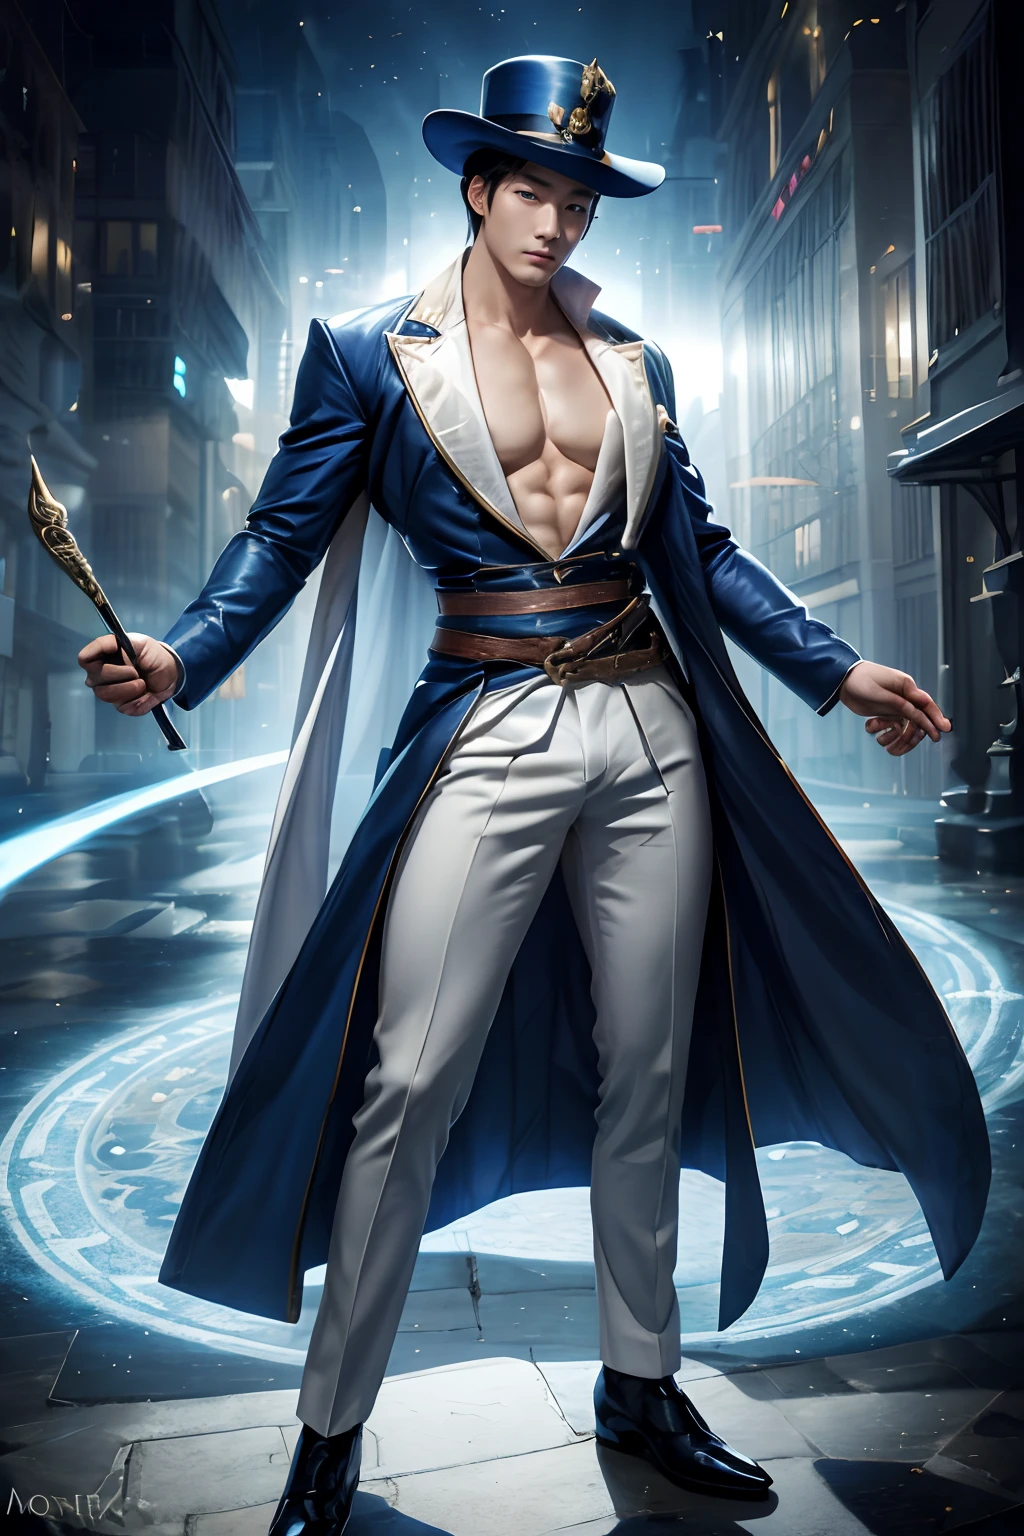 1 Korean man, 25 yo, solo, masterpiece, perfect face, muscular body, full body, (bare chest), (bare chest), muscular chest, abs, detailed tailcoat, monocle, hat, short hair, pretty blue eyes, perfect hands, gloves, strict and dynamic posture, staff, nardack, magic city background, with magic circles, background rays